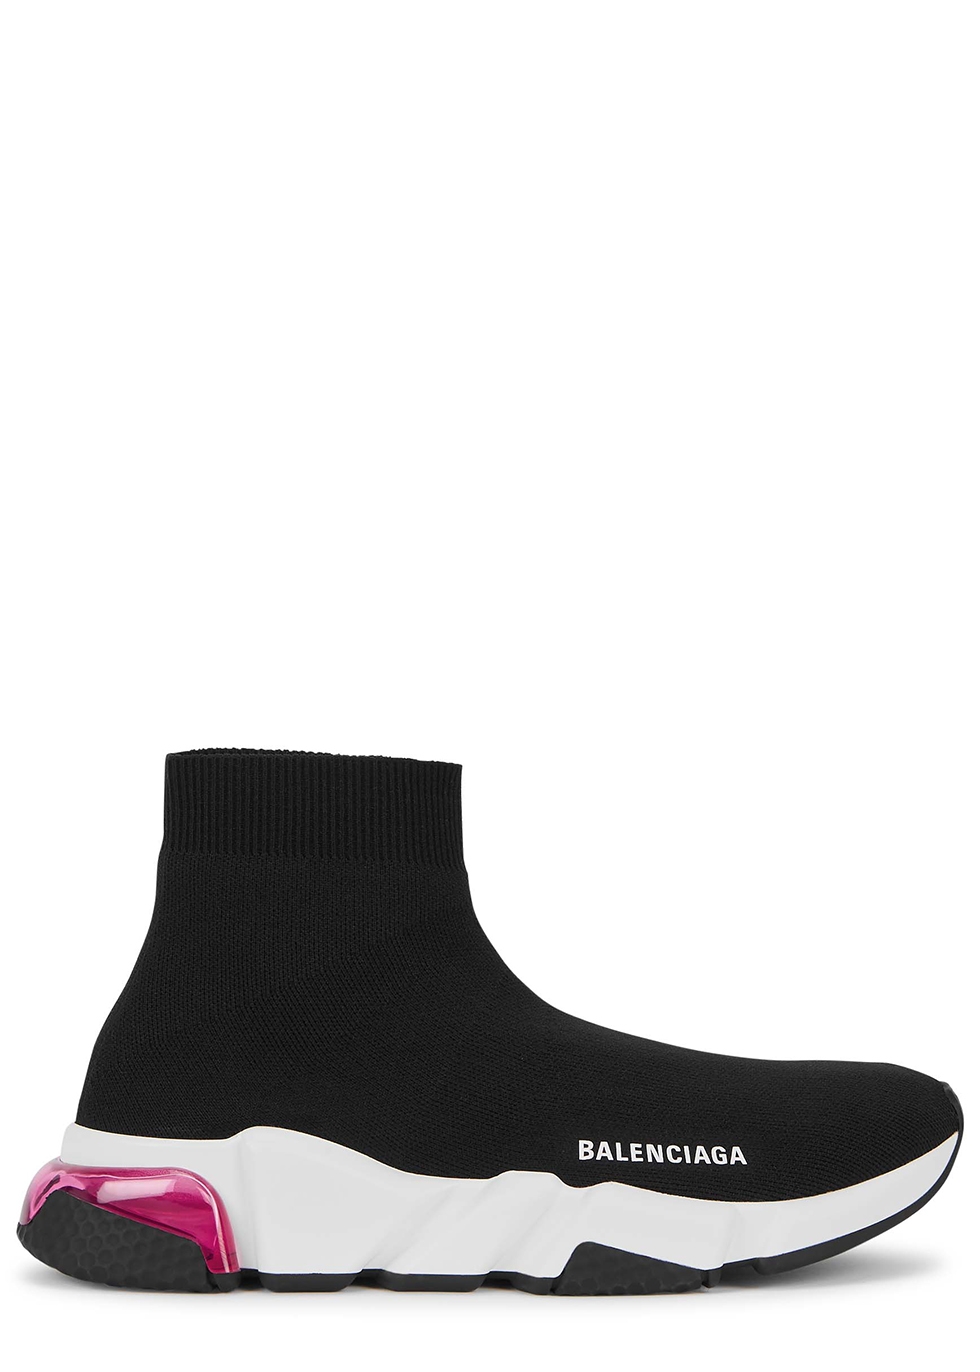 Balenciaga Speed Trainer For Sale Philippines Mount Mercy